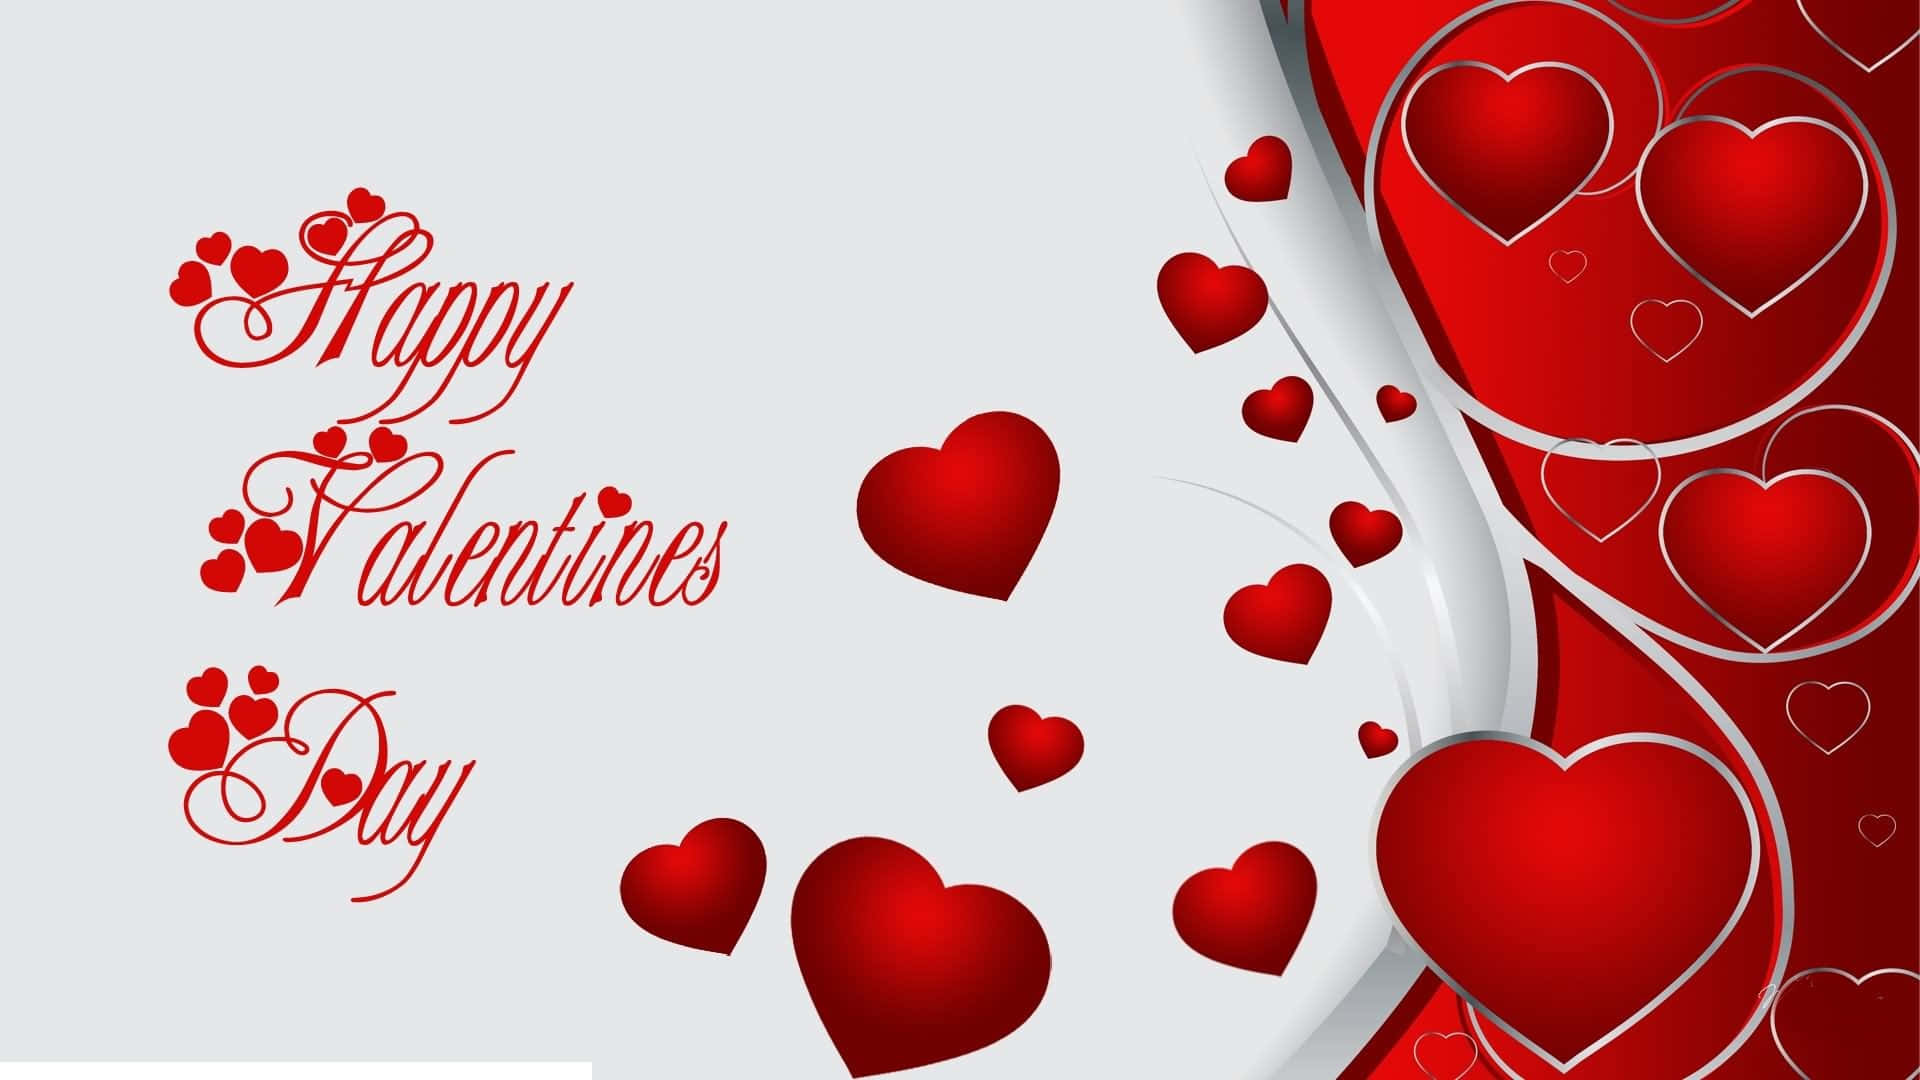 Celebrate your love on Valentines Day with this lovely heart HD wallpaper! Wallpaper